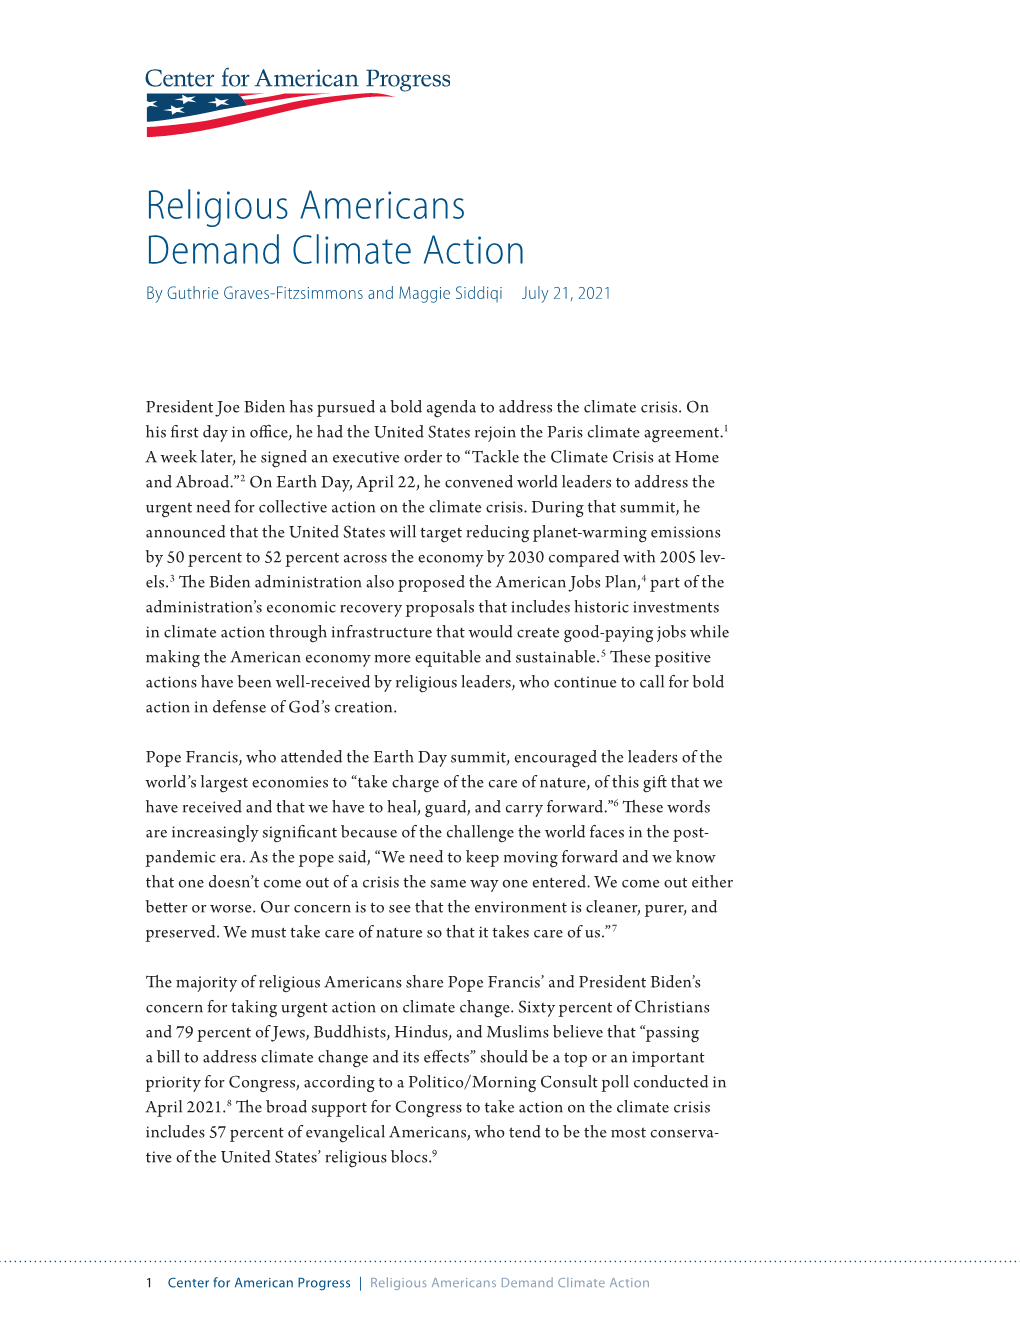 Religious Americans Demand Climate Action by Guthrie Graves-Fitzsimmons and Maggie Siddiqi July 21, 2021